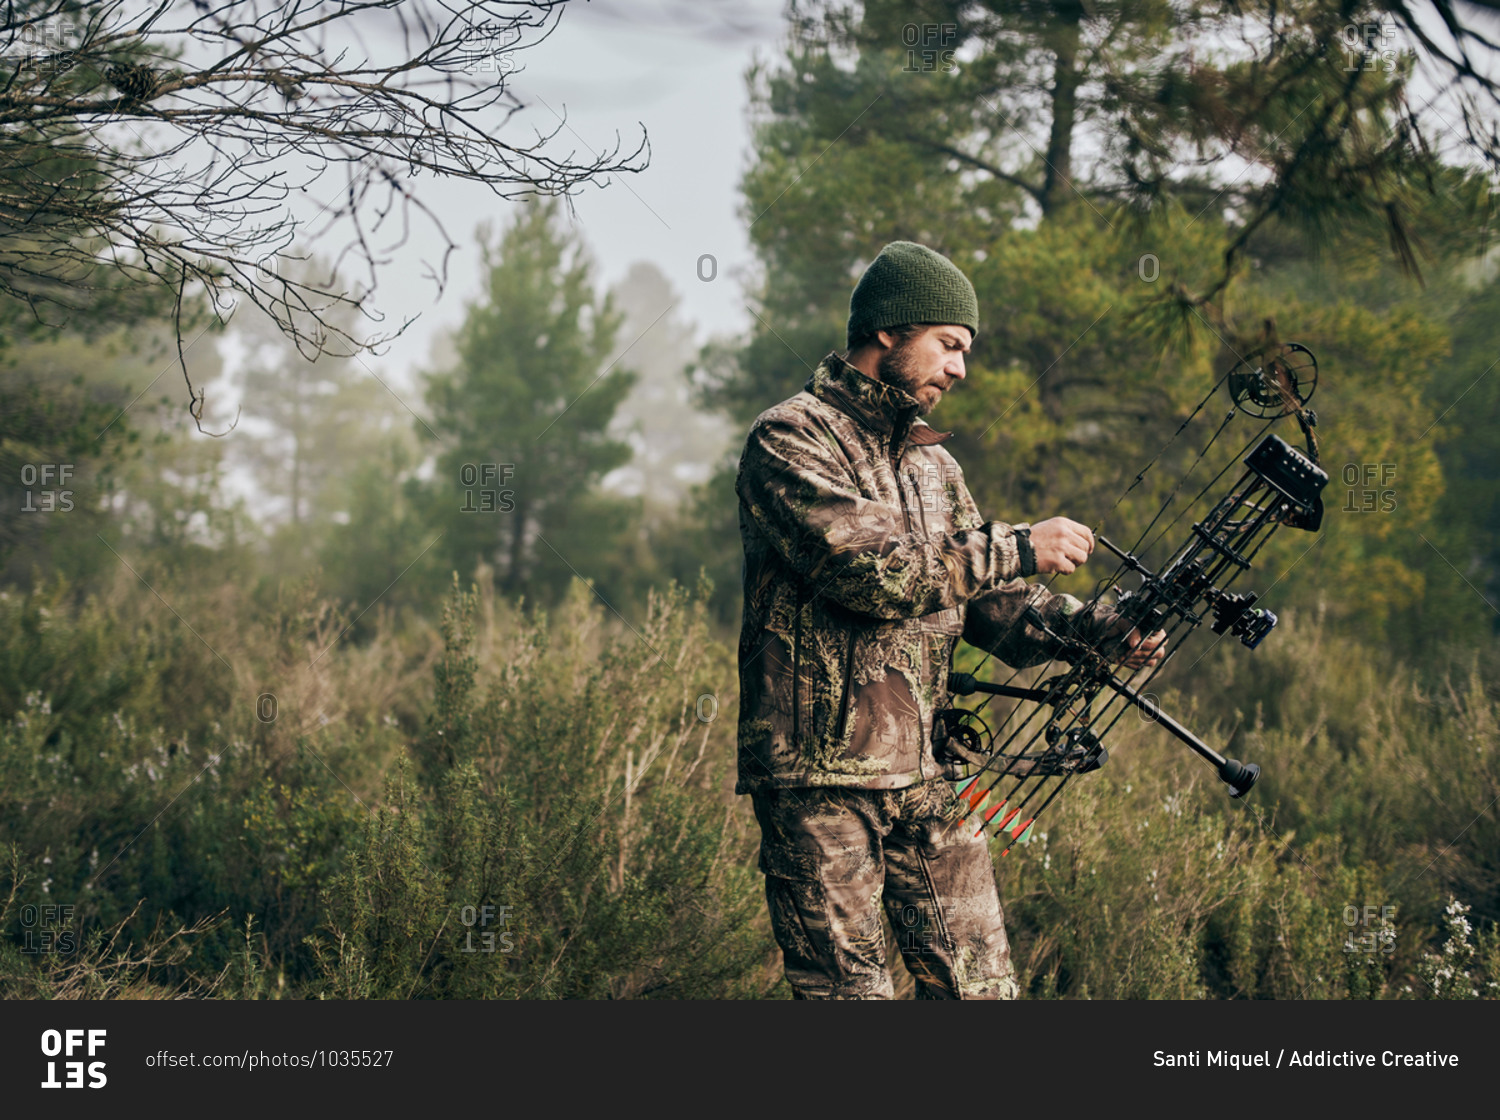 Side view of serious male hunter adjusting compound bow with arrow while preparing for hunting in woods in autumn